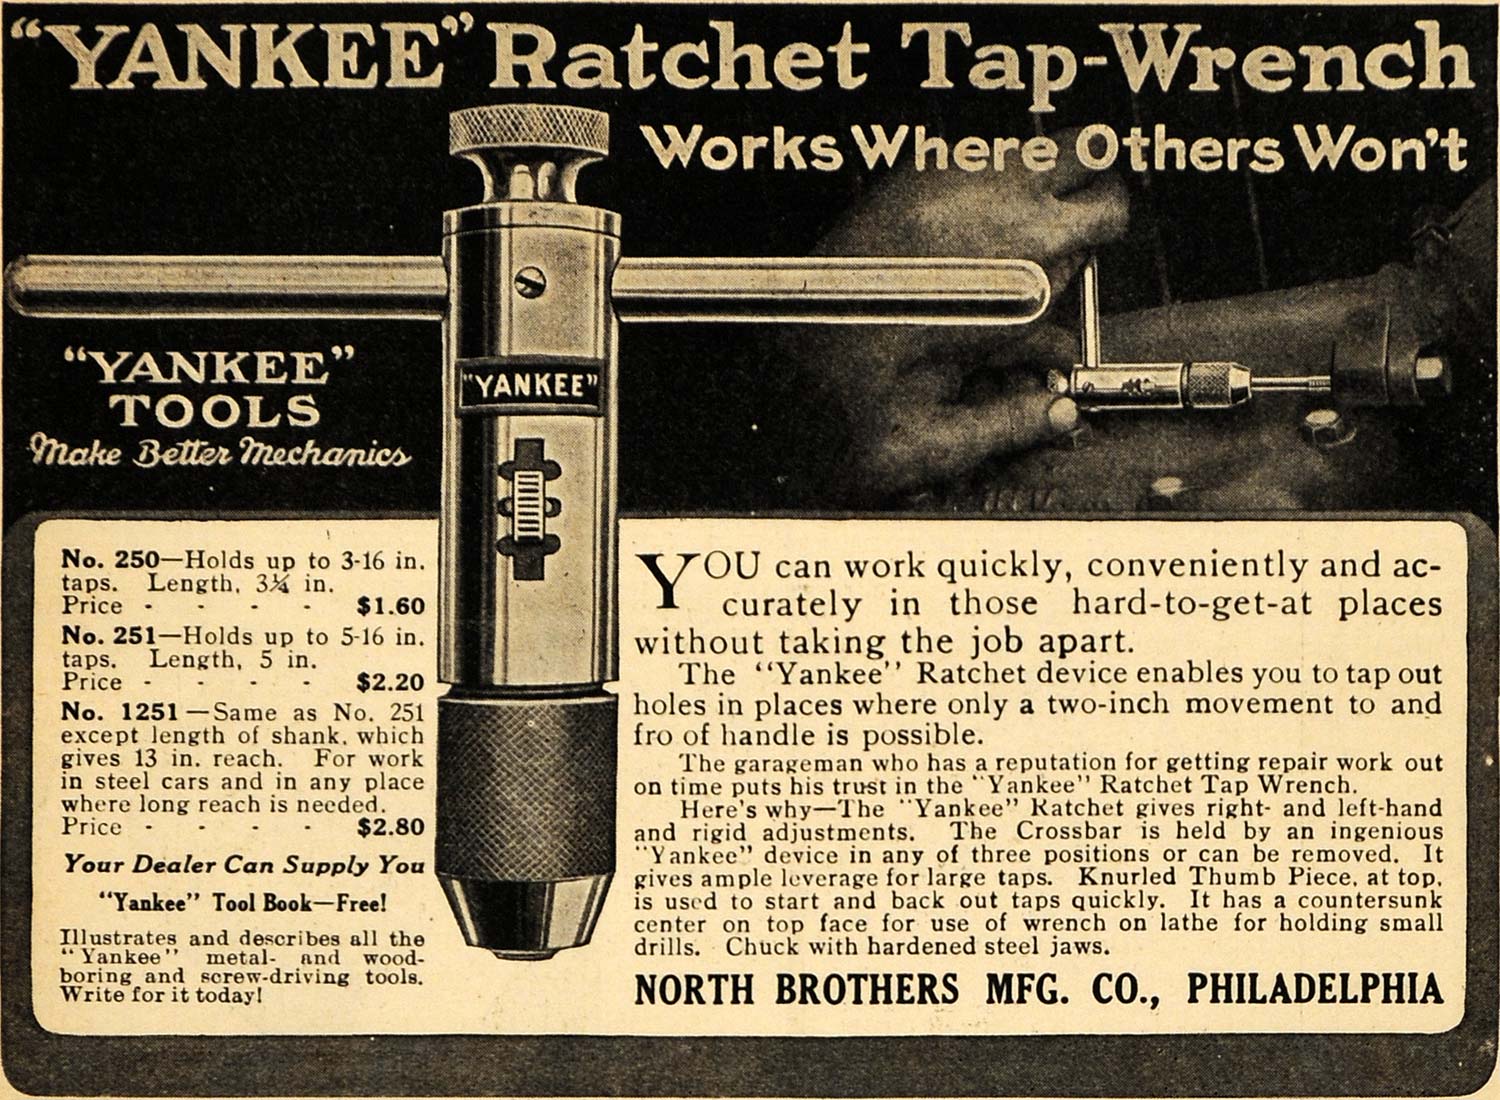 1917 Ad North Bros Yankee Ratchet Tap-Wrench Models WWI - ORIGINAL ILW1